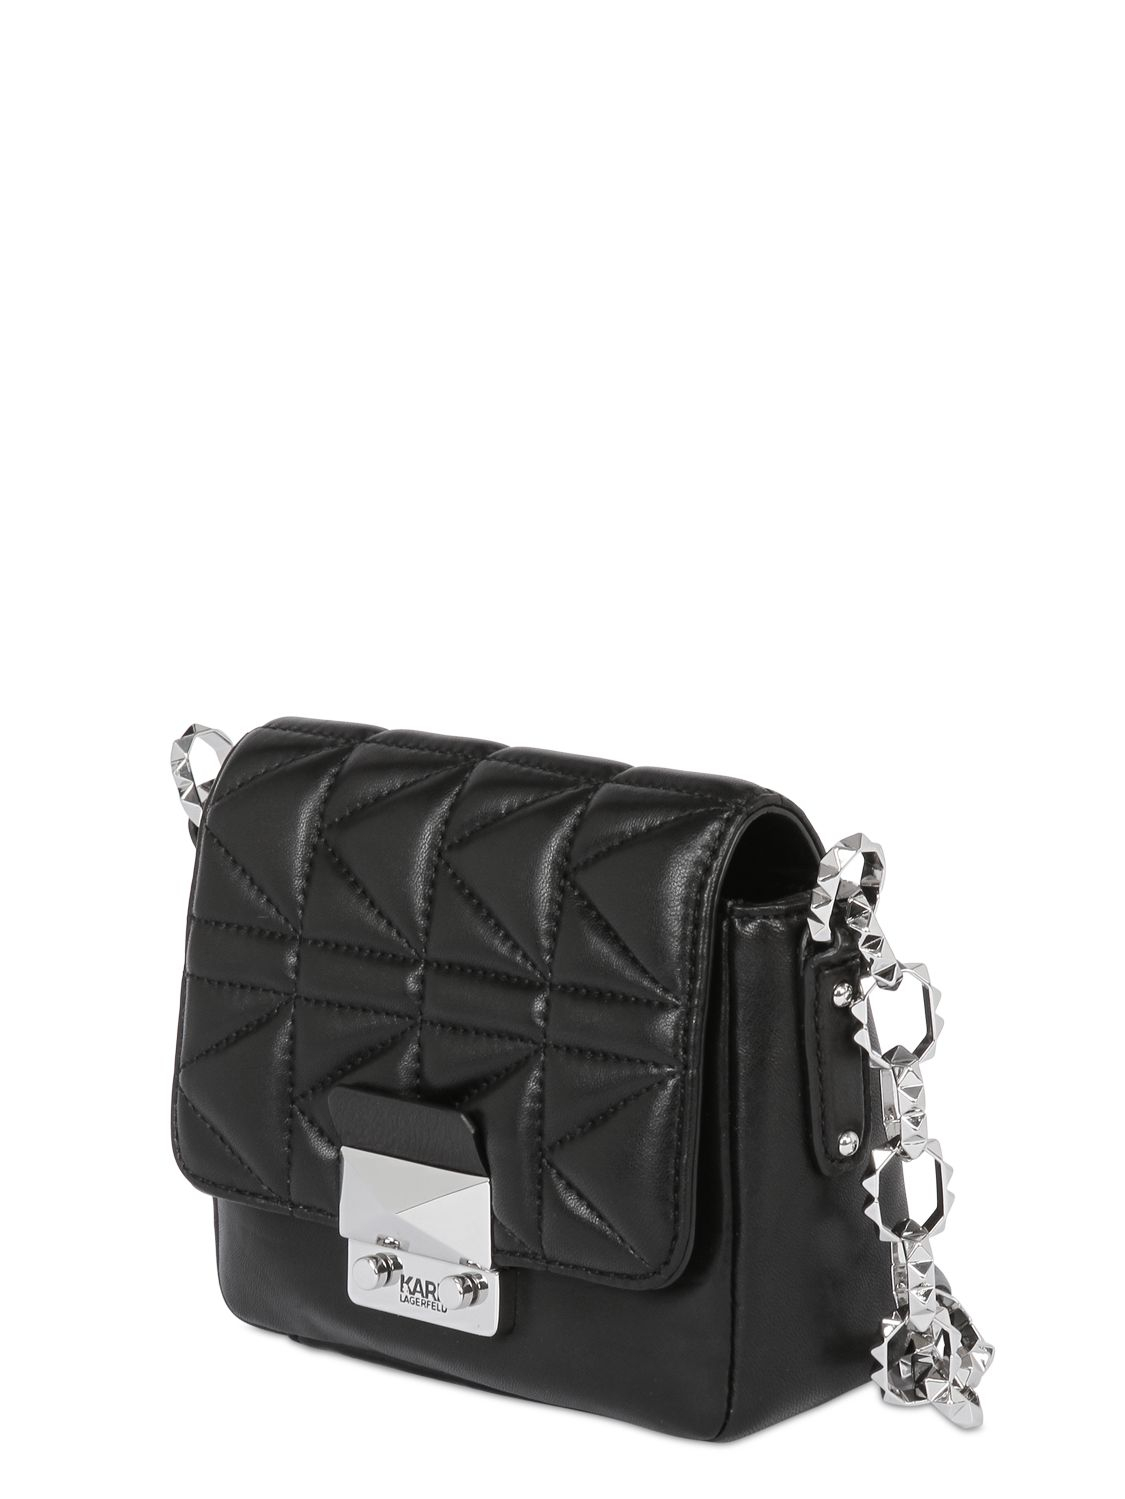 Lyst - Karl Lagerfeld Kuilted Nappa Leather Shoulder Bag in Black